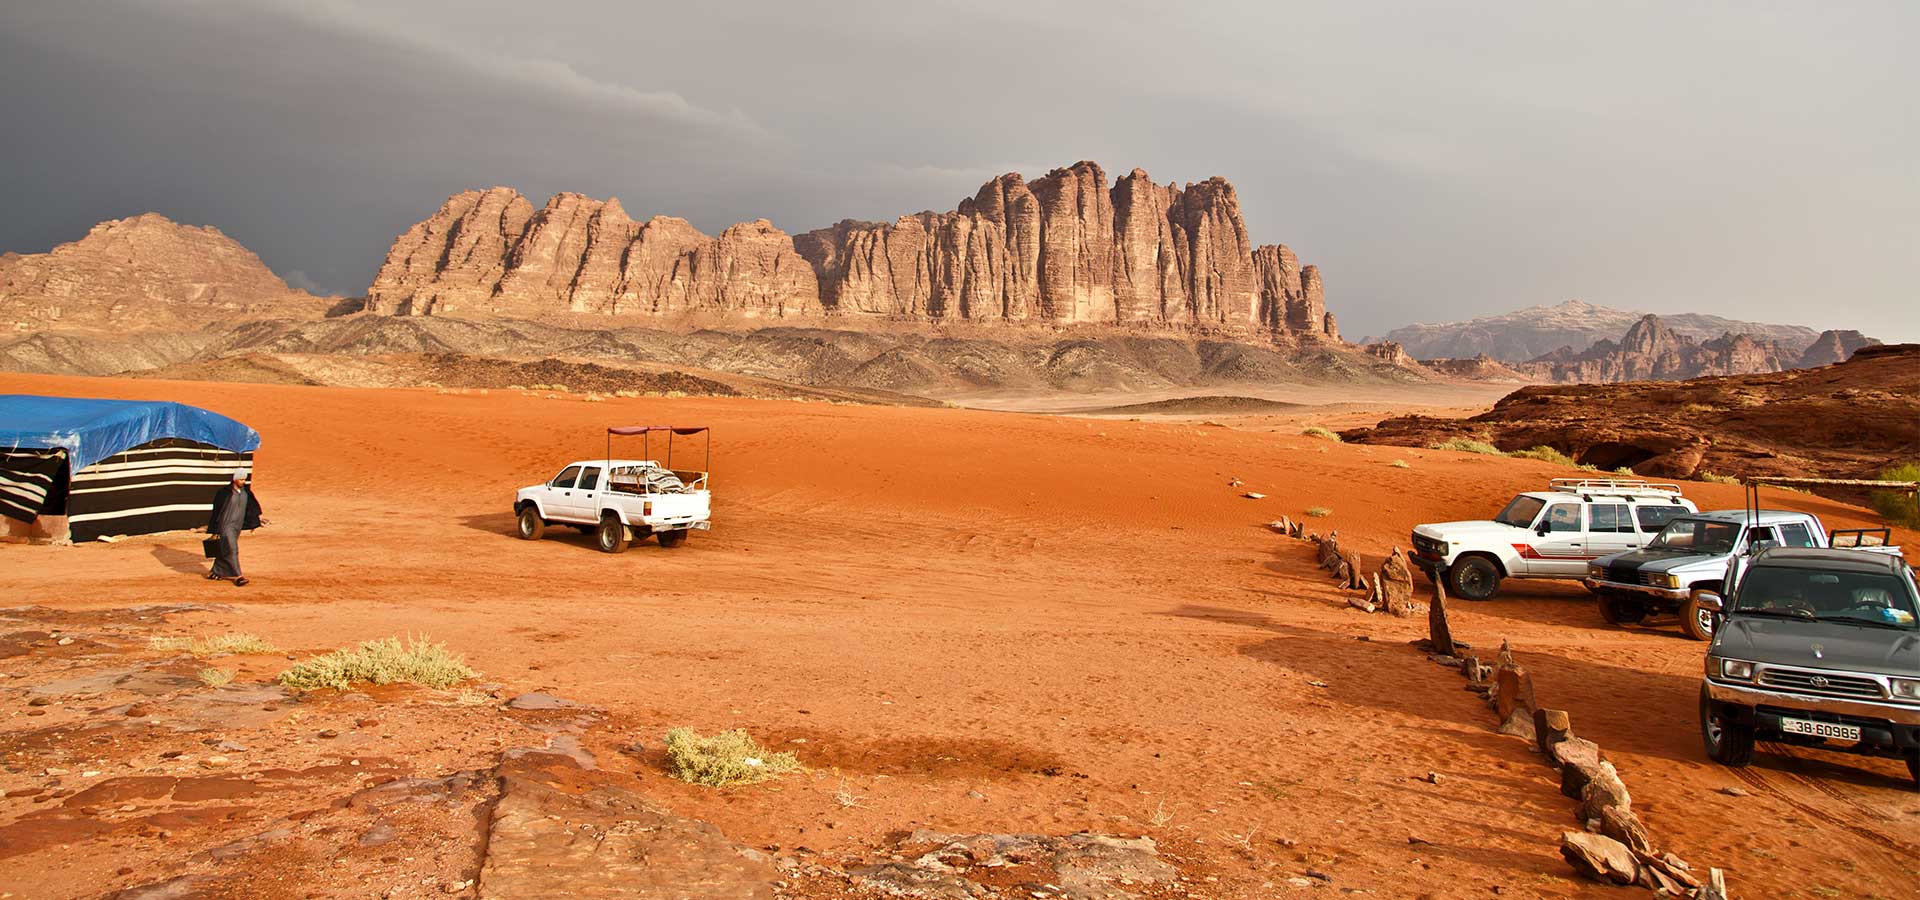 Explore Jordan's Wonders with Our Travel Packages